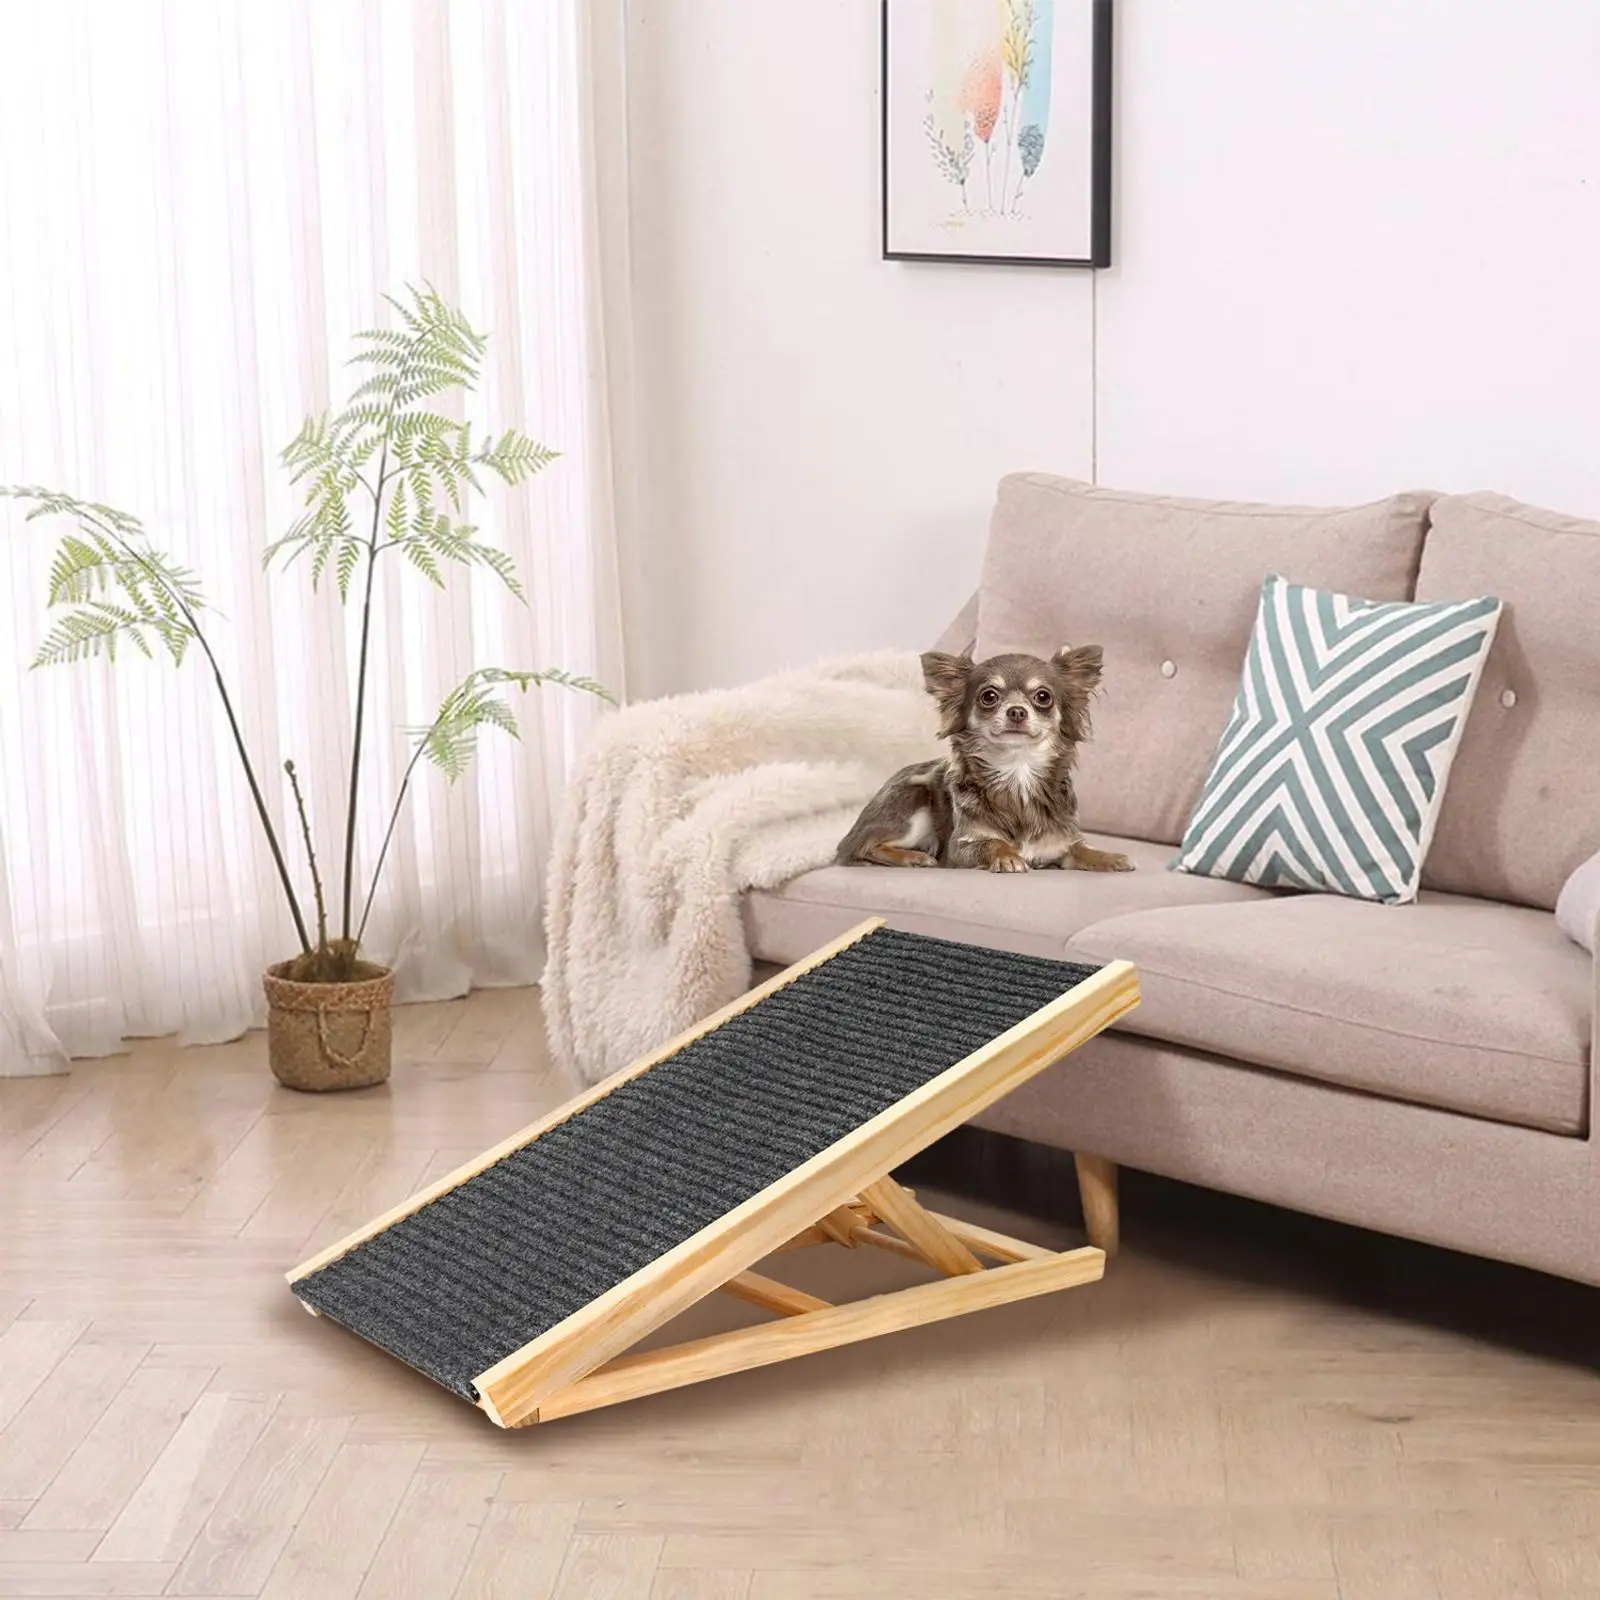 Wood Dog Ramp Pet Ladder Adjustable Height Portable Folding for Couch Indoor